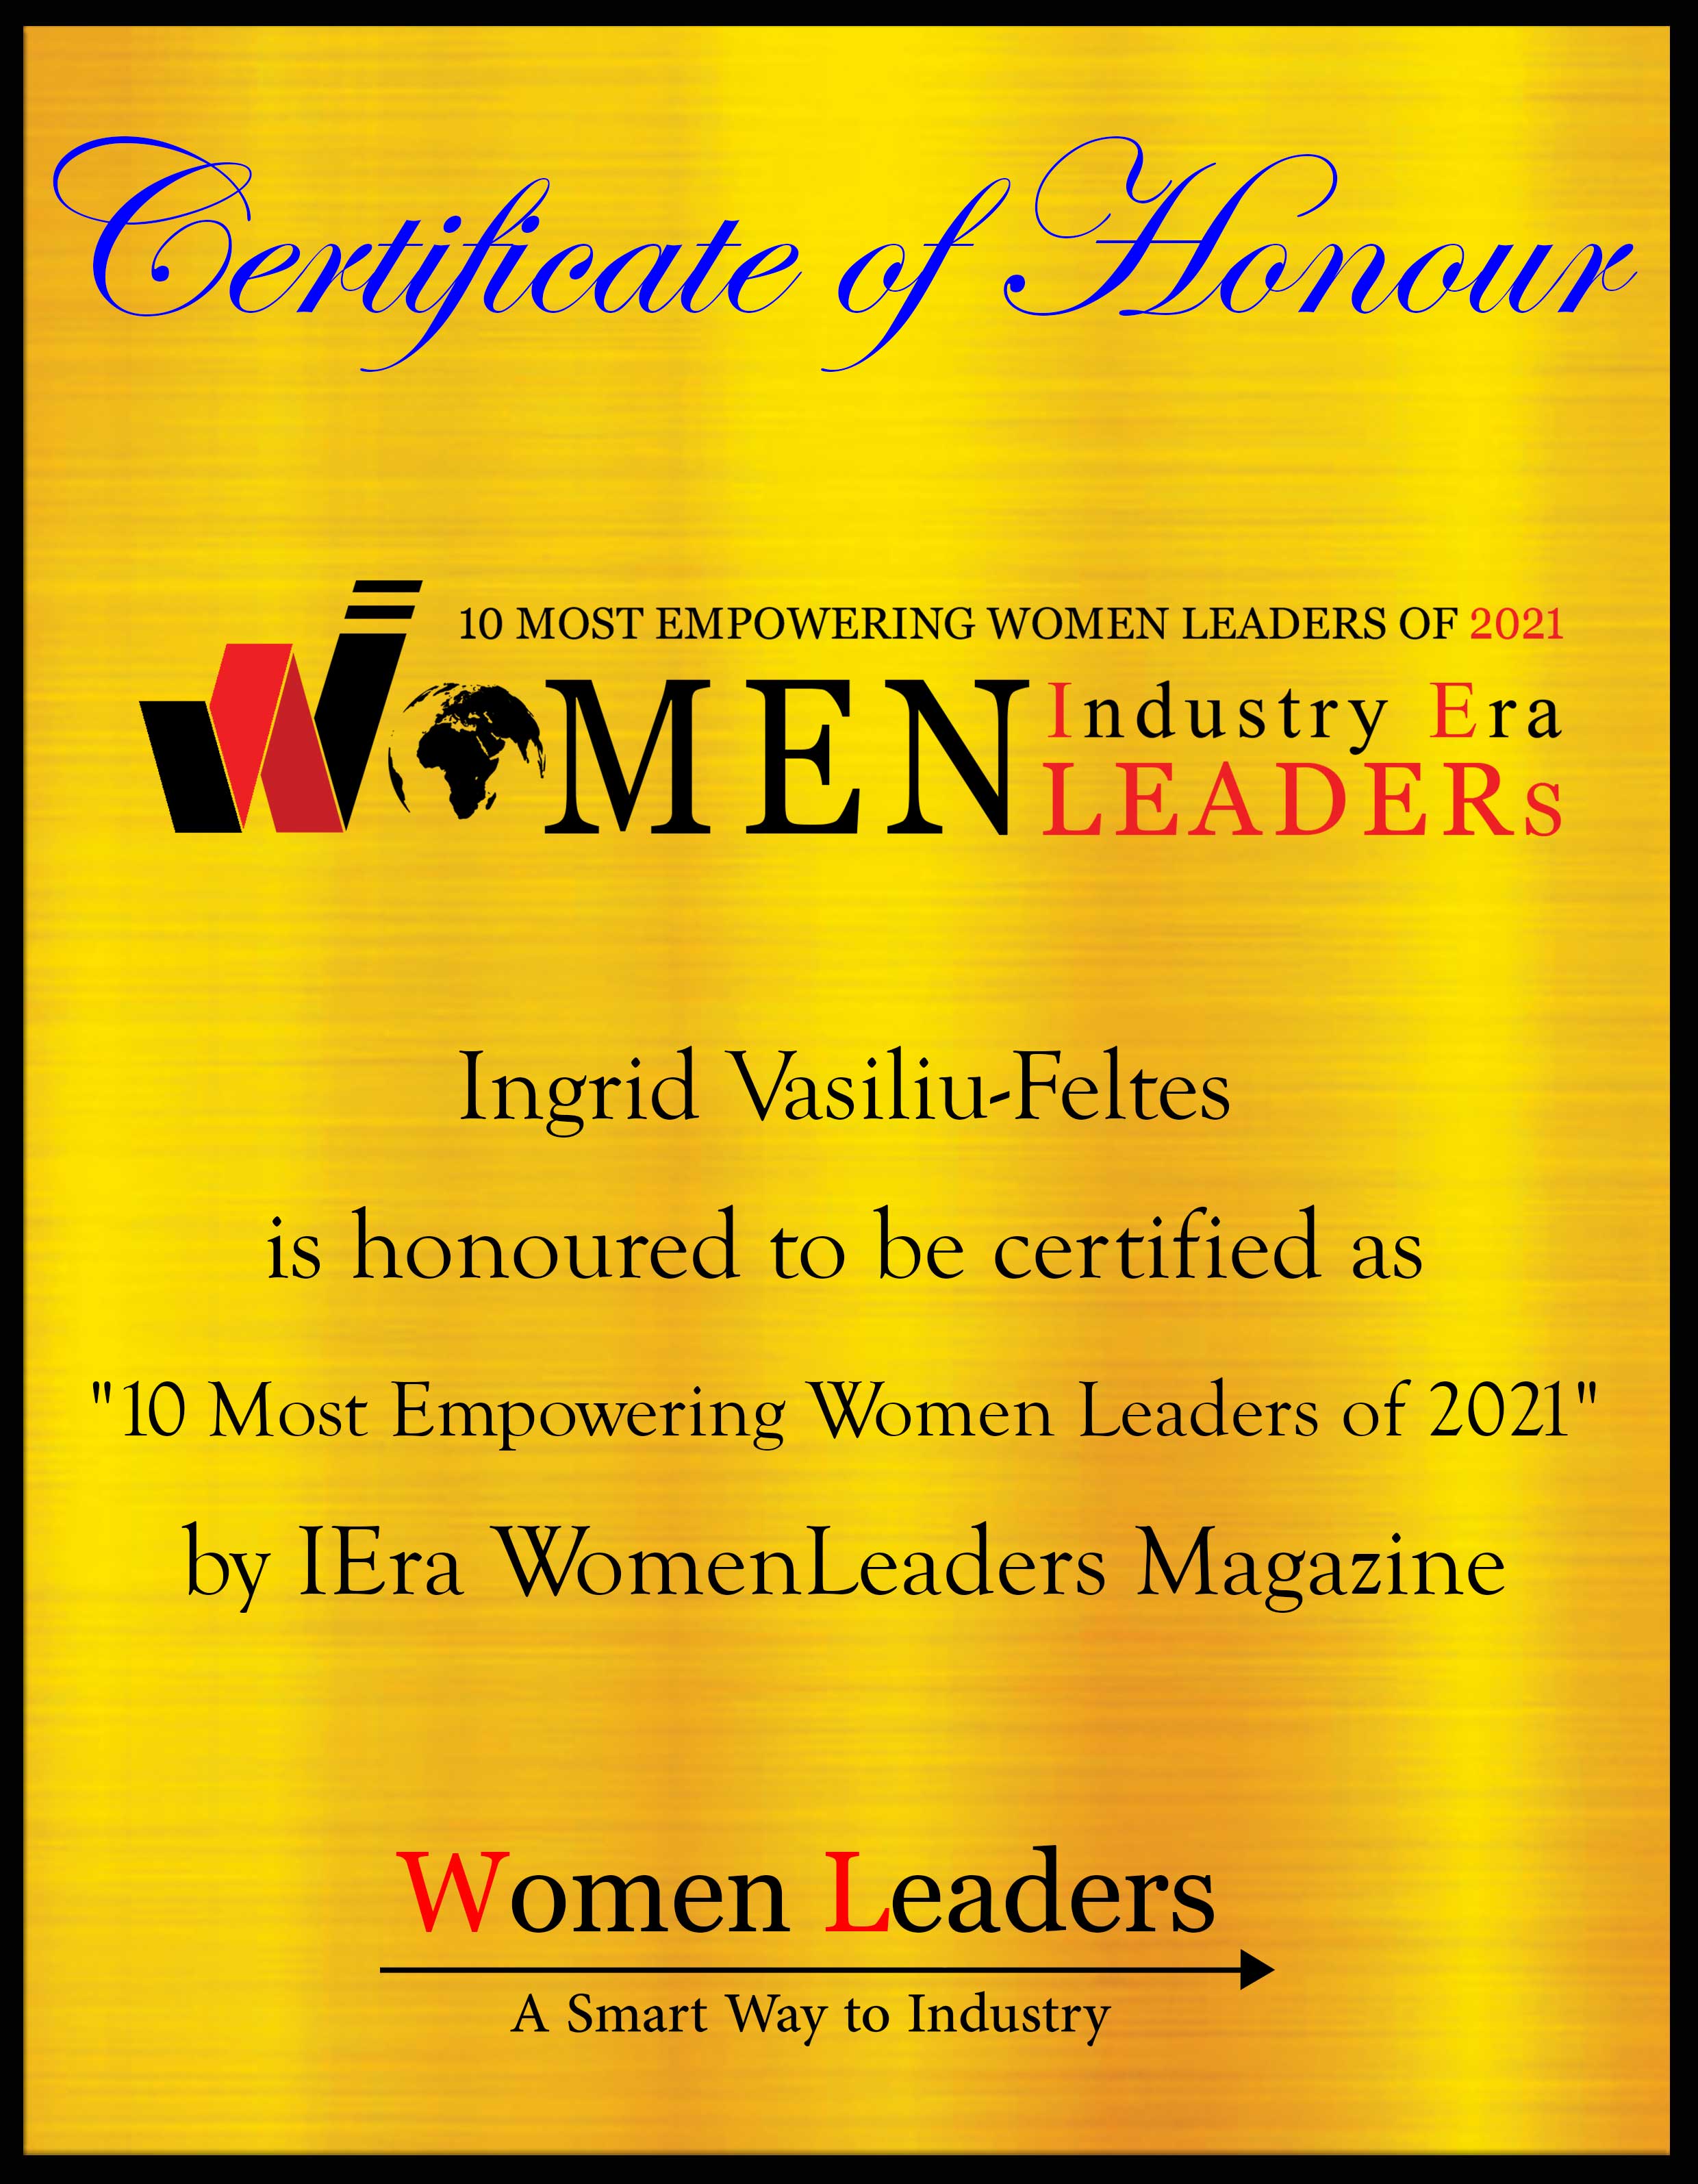 Ingrid Vasiliu-Feltes, Chief Executive Officer of Softhread, Most Empowering Women Leaders of 2021